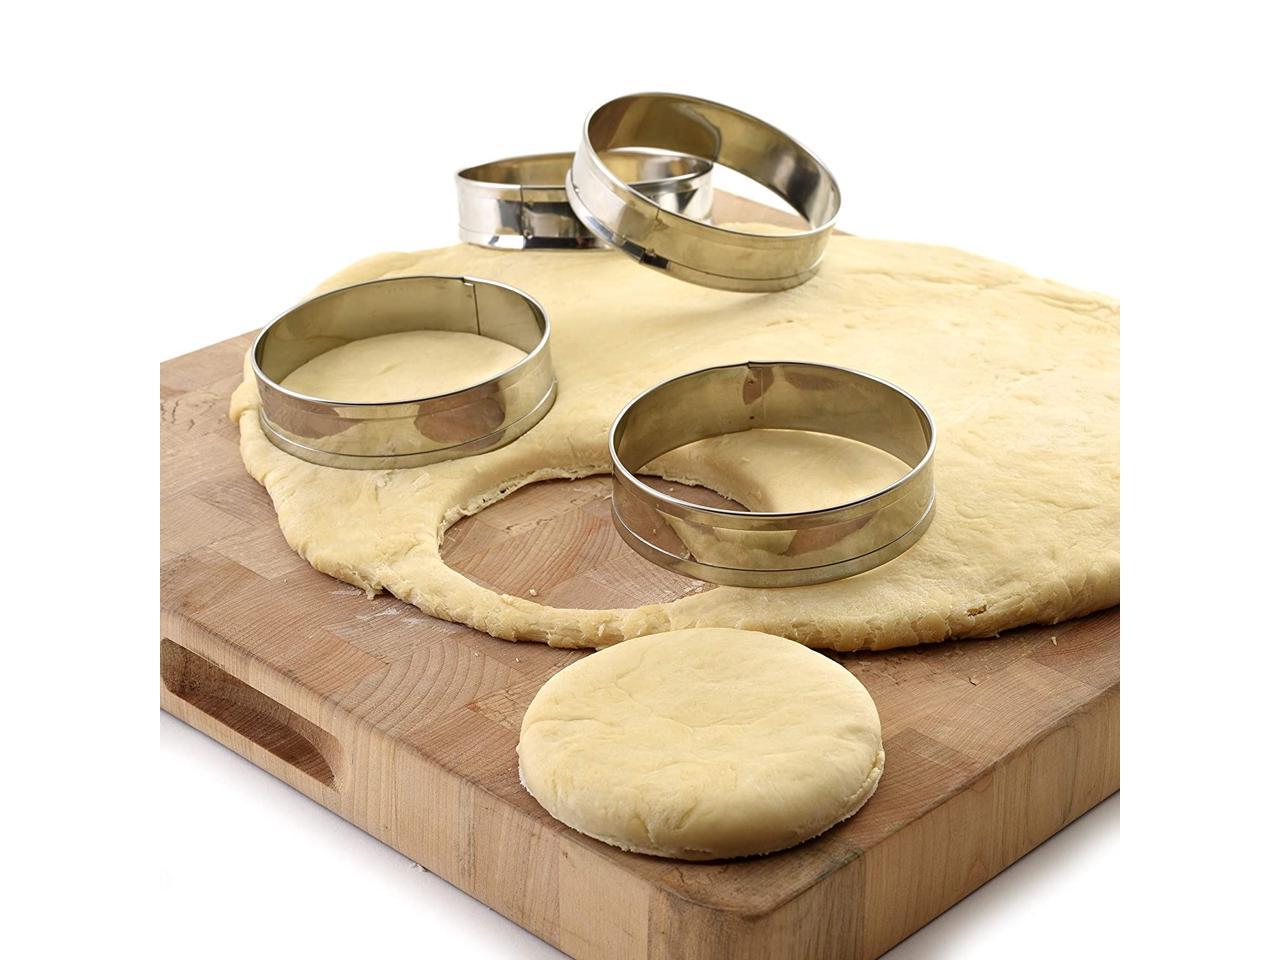 Norpro Stainless Steel English Muffin Rings, Set of 4, sylver - Newegg.com Stainless Steel English Muffin Rings